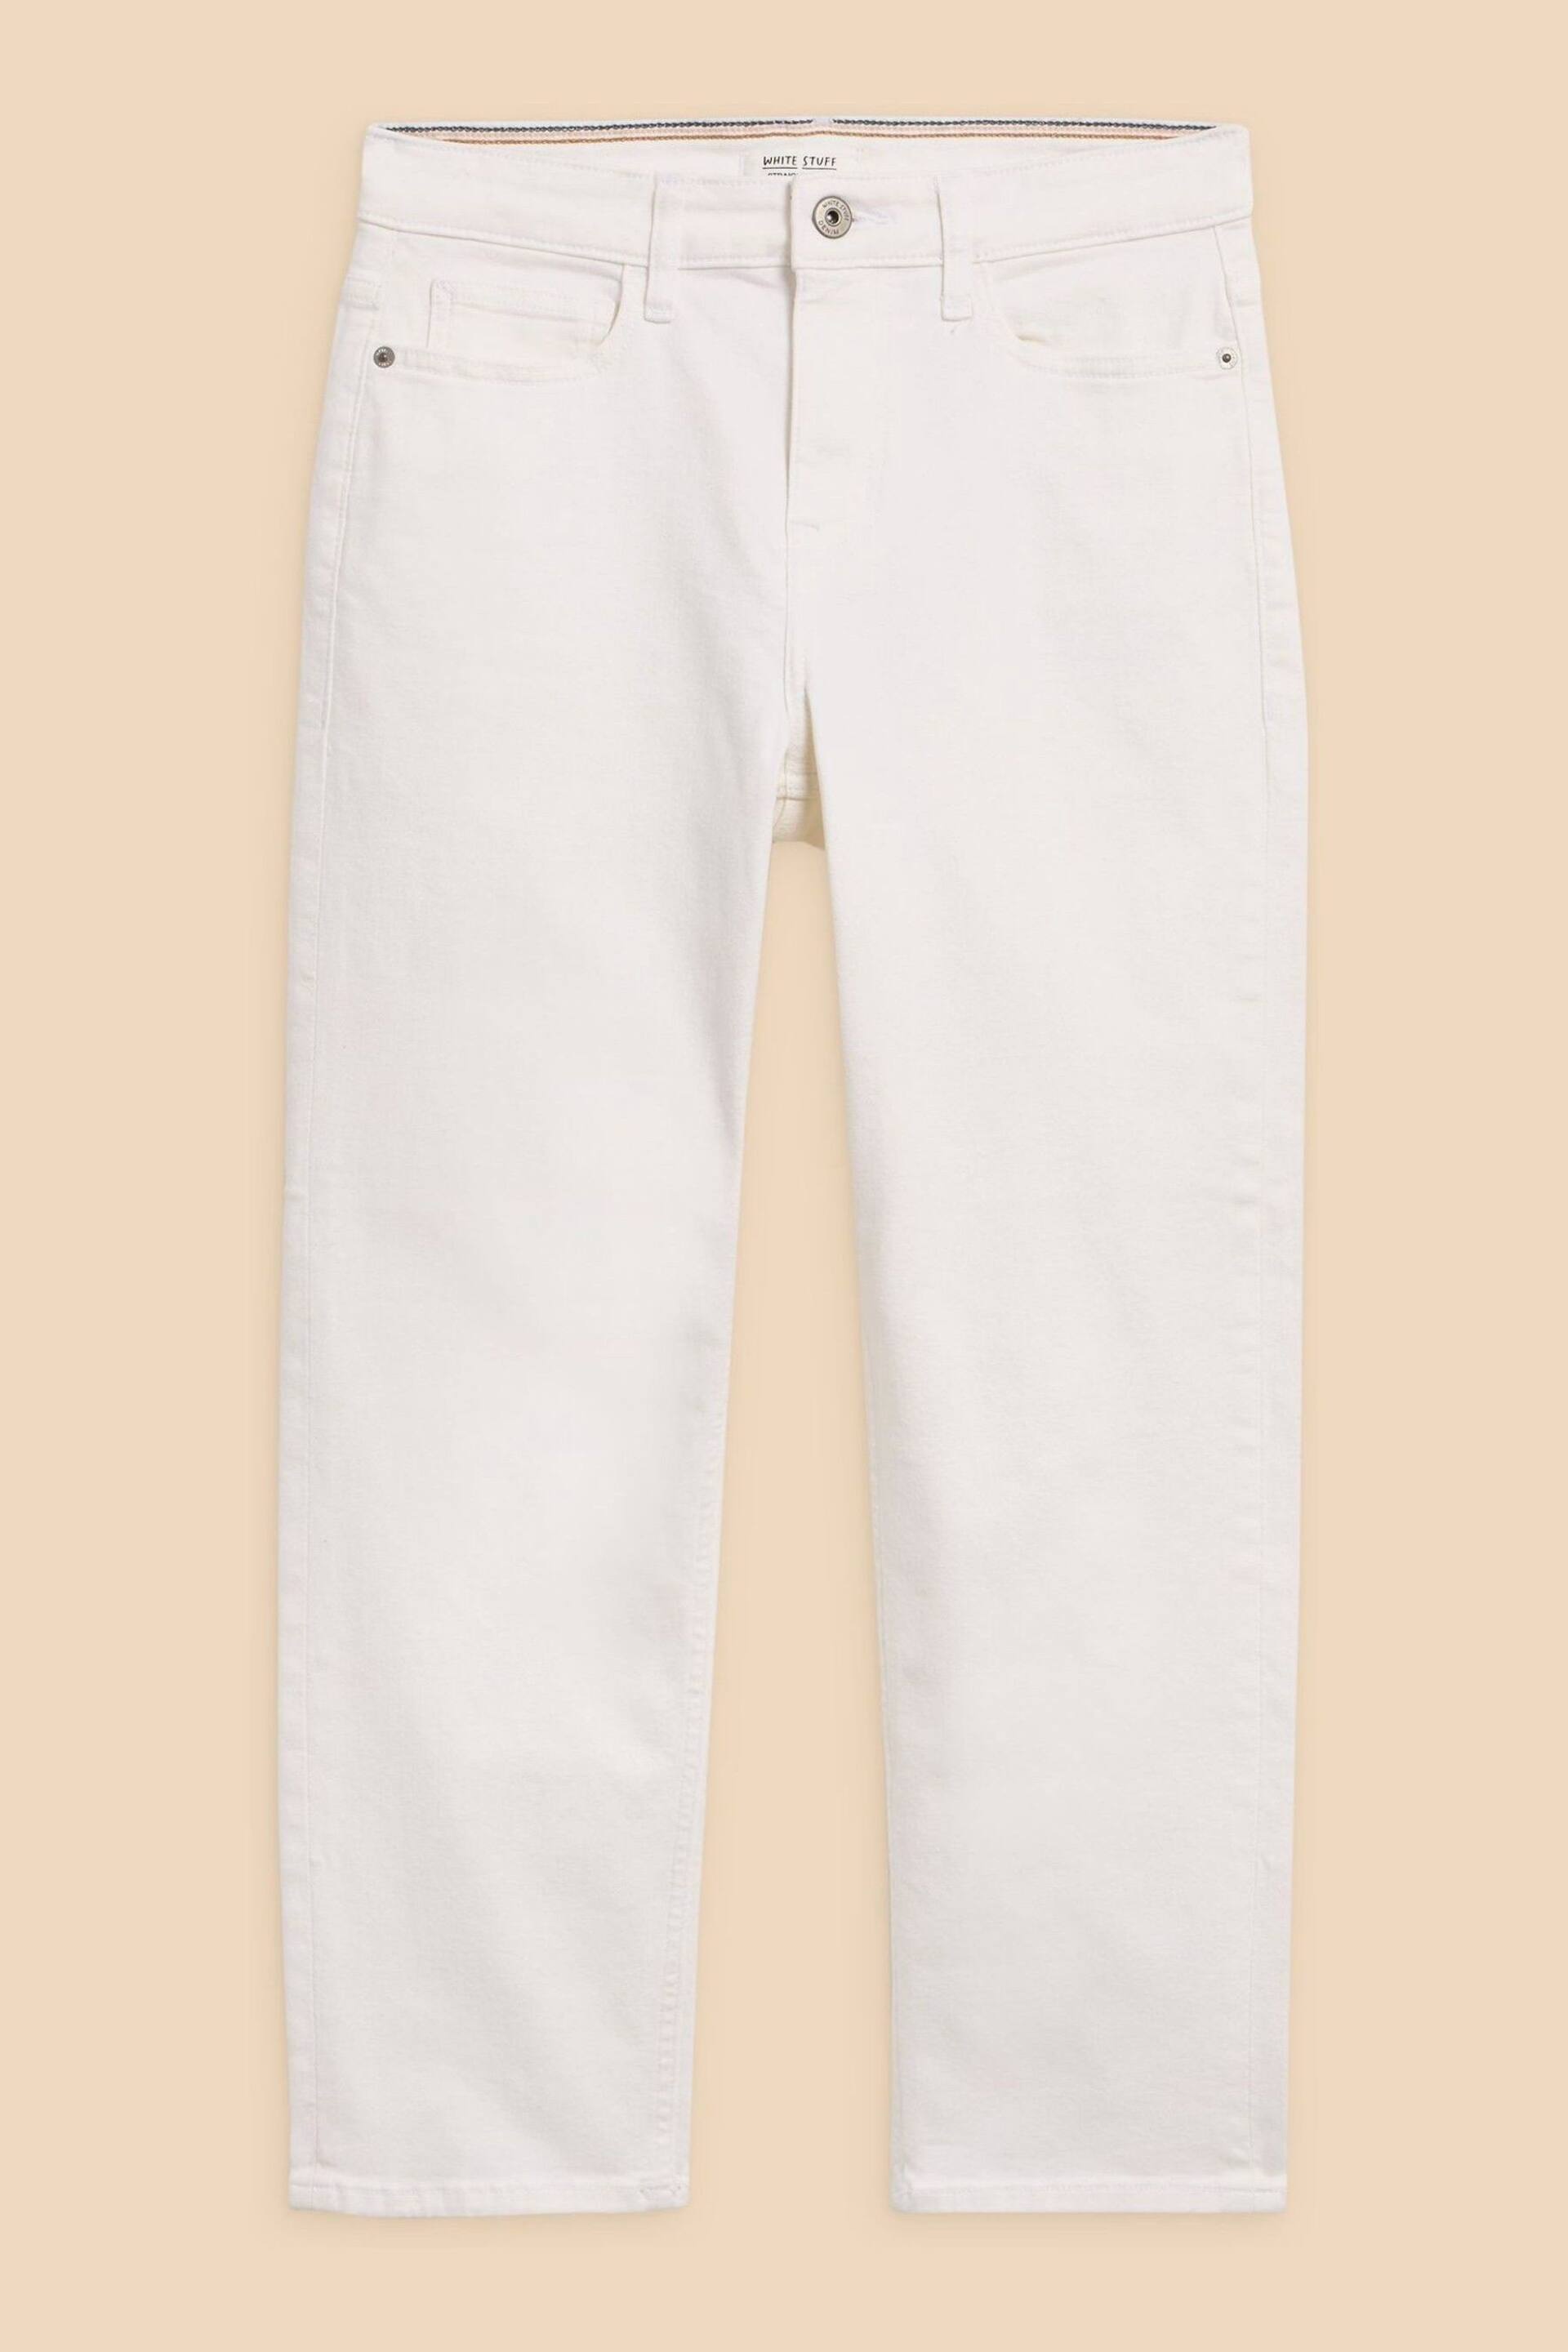 White Stuff Natural Blake Straight Crop Jeans - Image 5 of 7